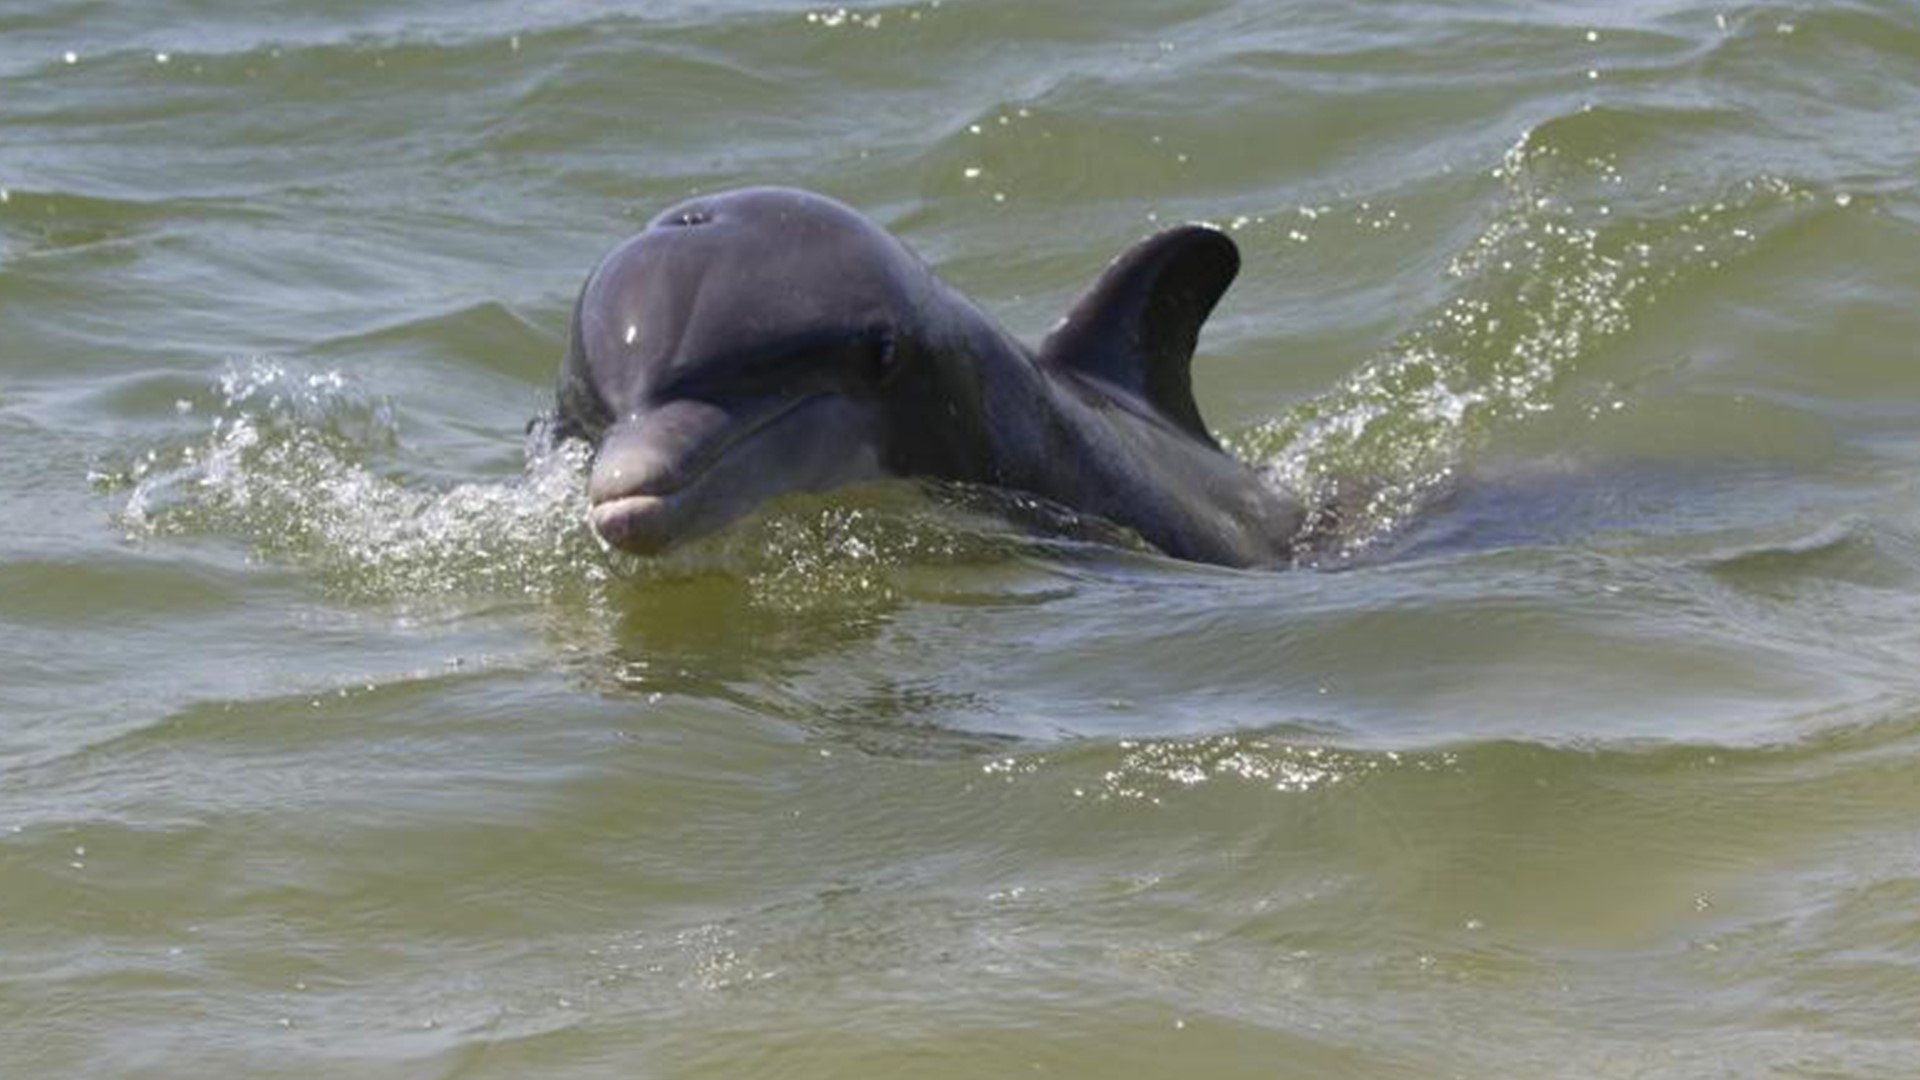 NOAA says the dolphin has grown accustomed to humans and has started displaying aggressive behavior.